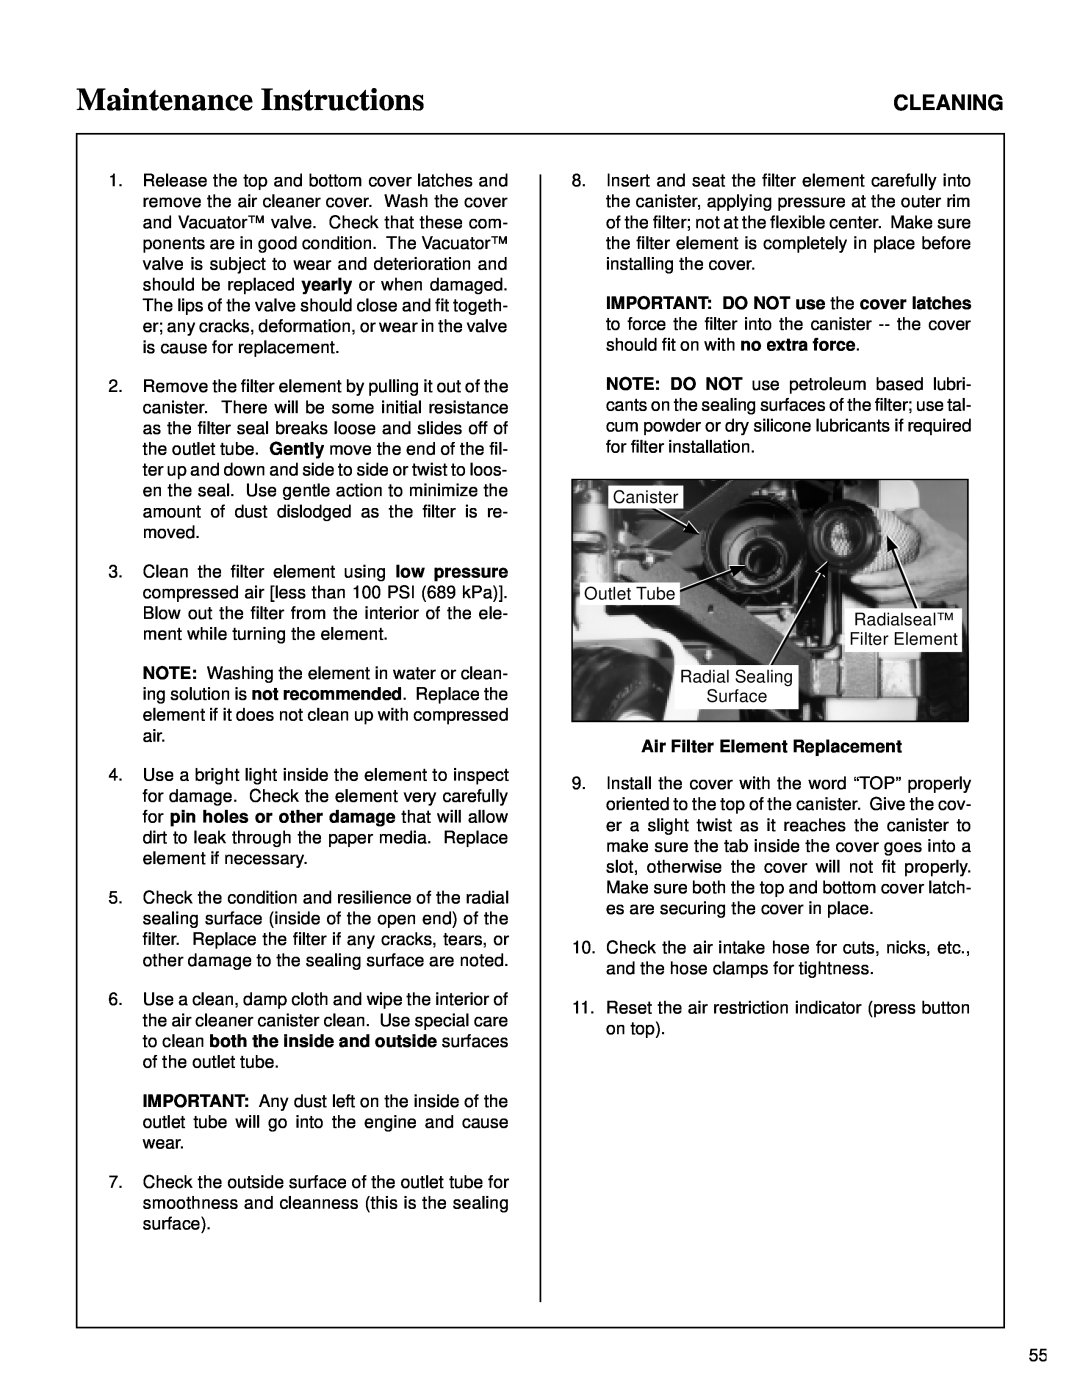 Walker MT owner manual Maintenance Instructions, Cleaning, Air Filter Element Replacement 